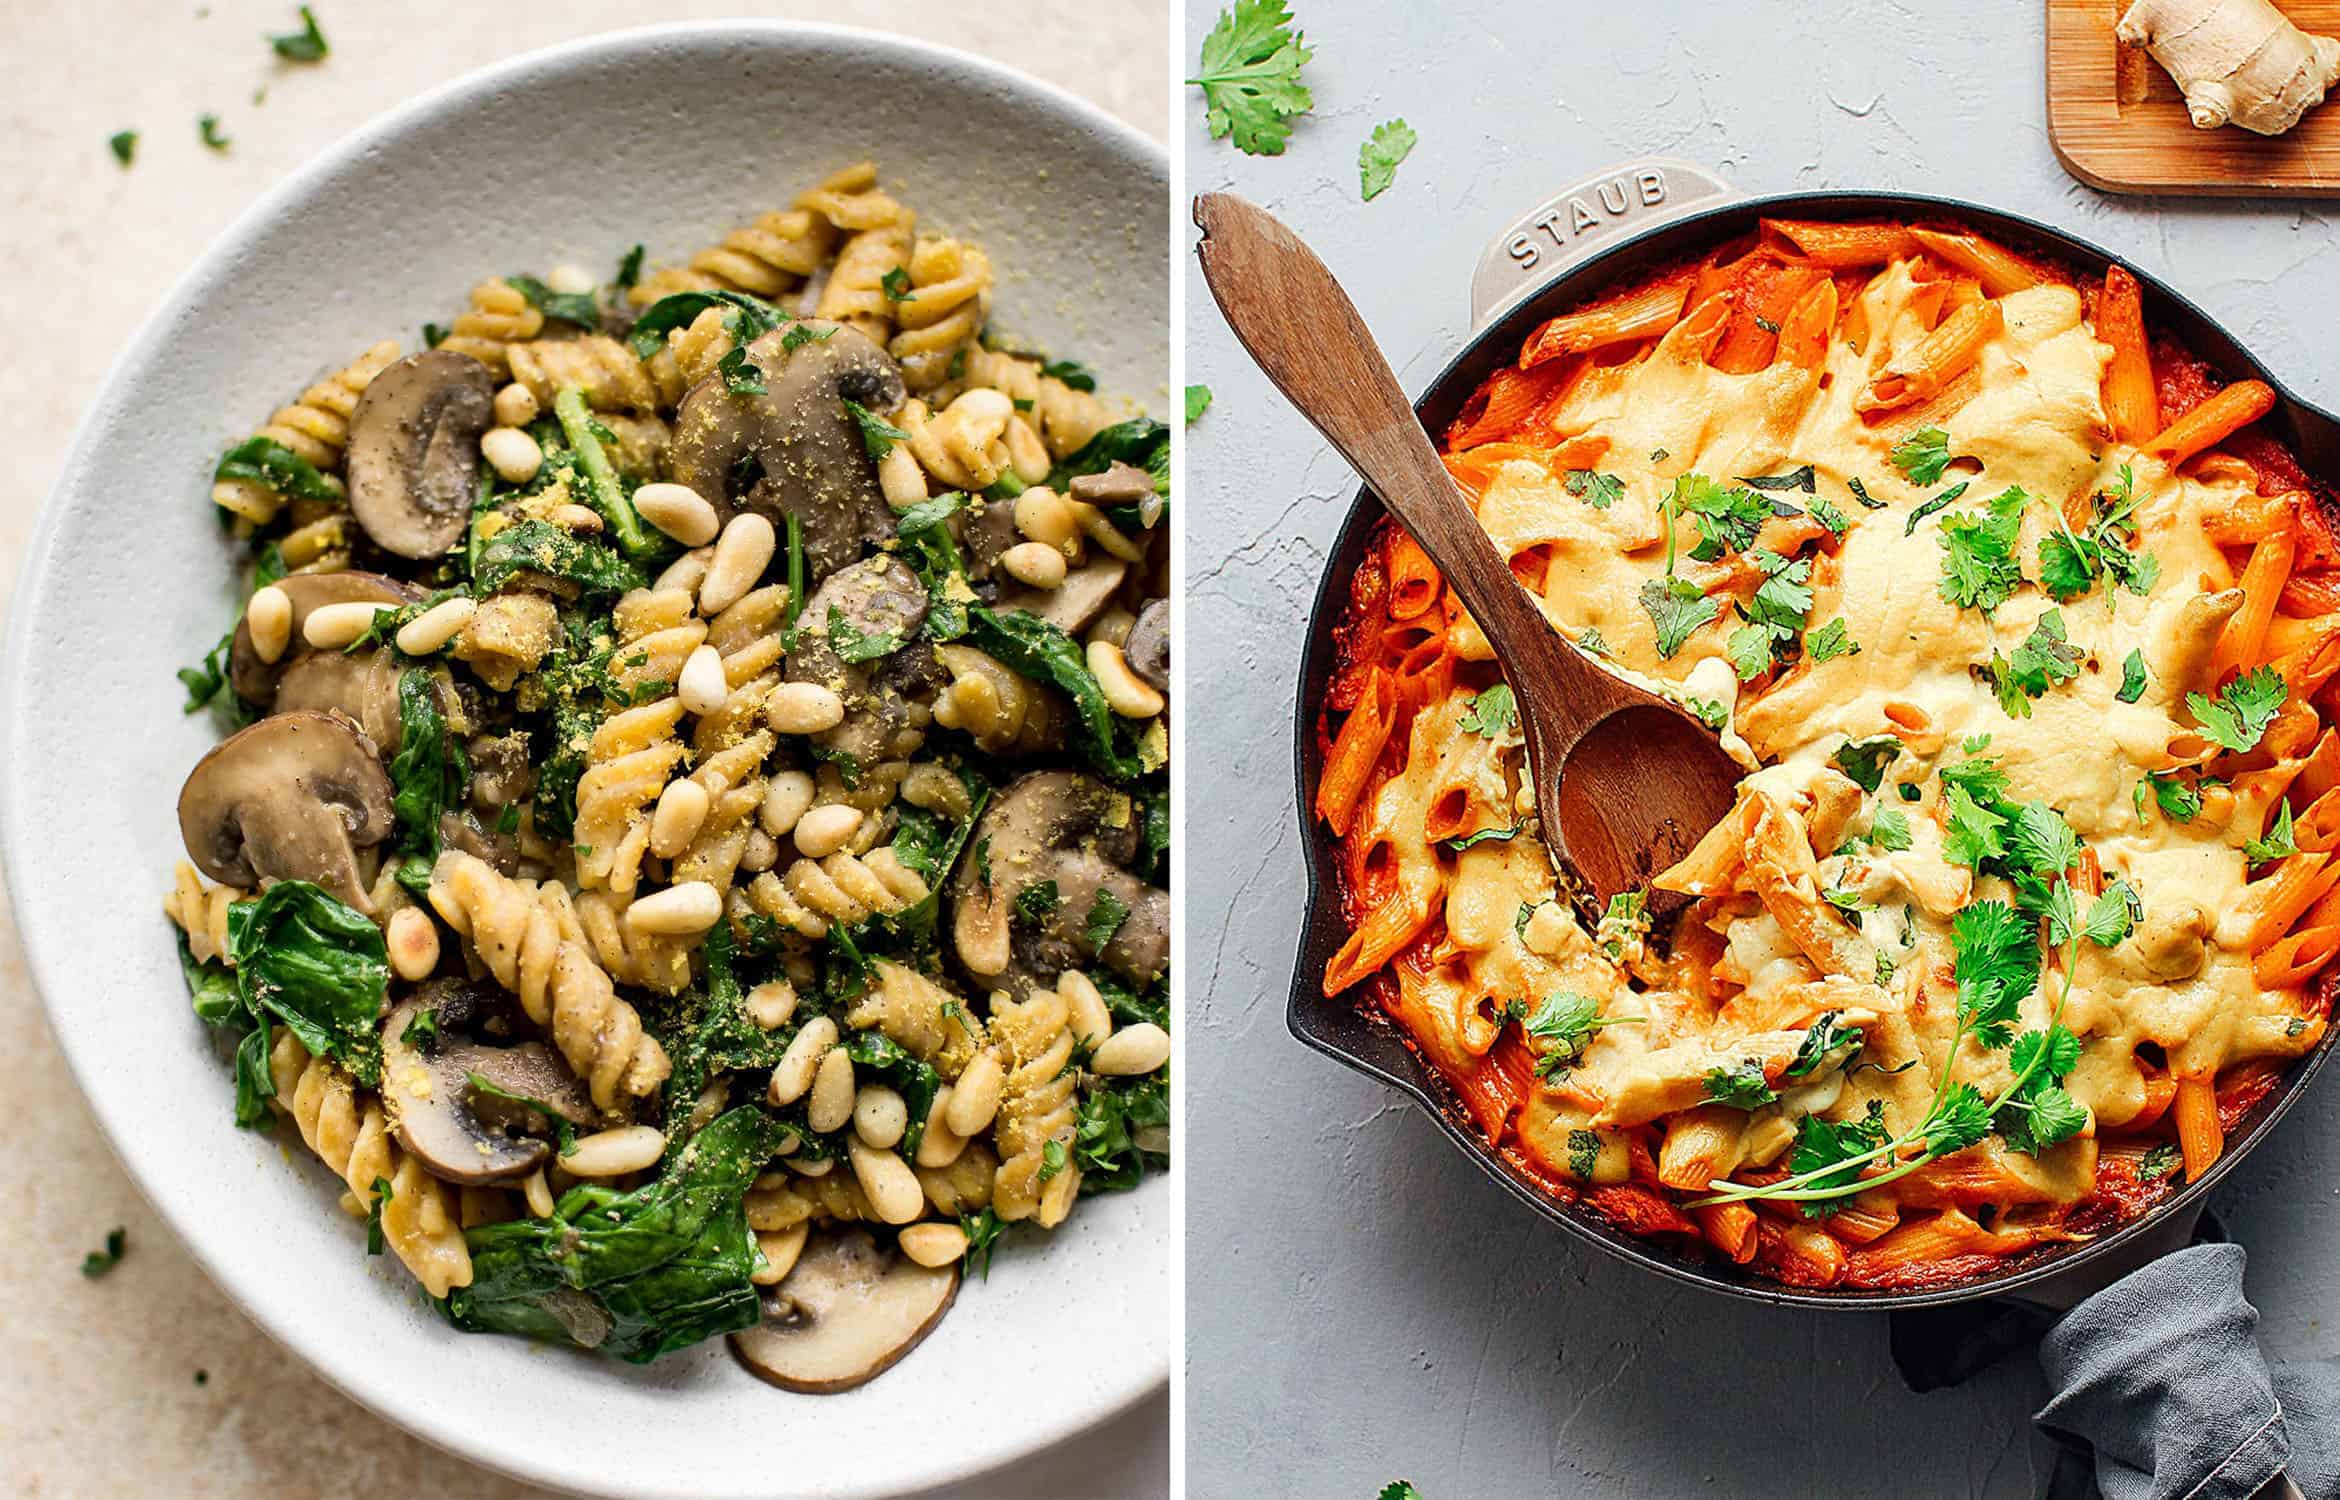 Spinach and mushroom fusilli on a white plate by Salt & Lavander and Penne pasta bake in a dark skillet by Full of Plants